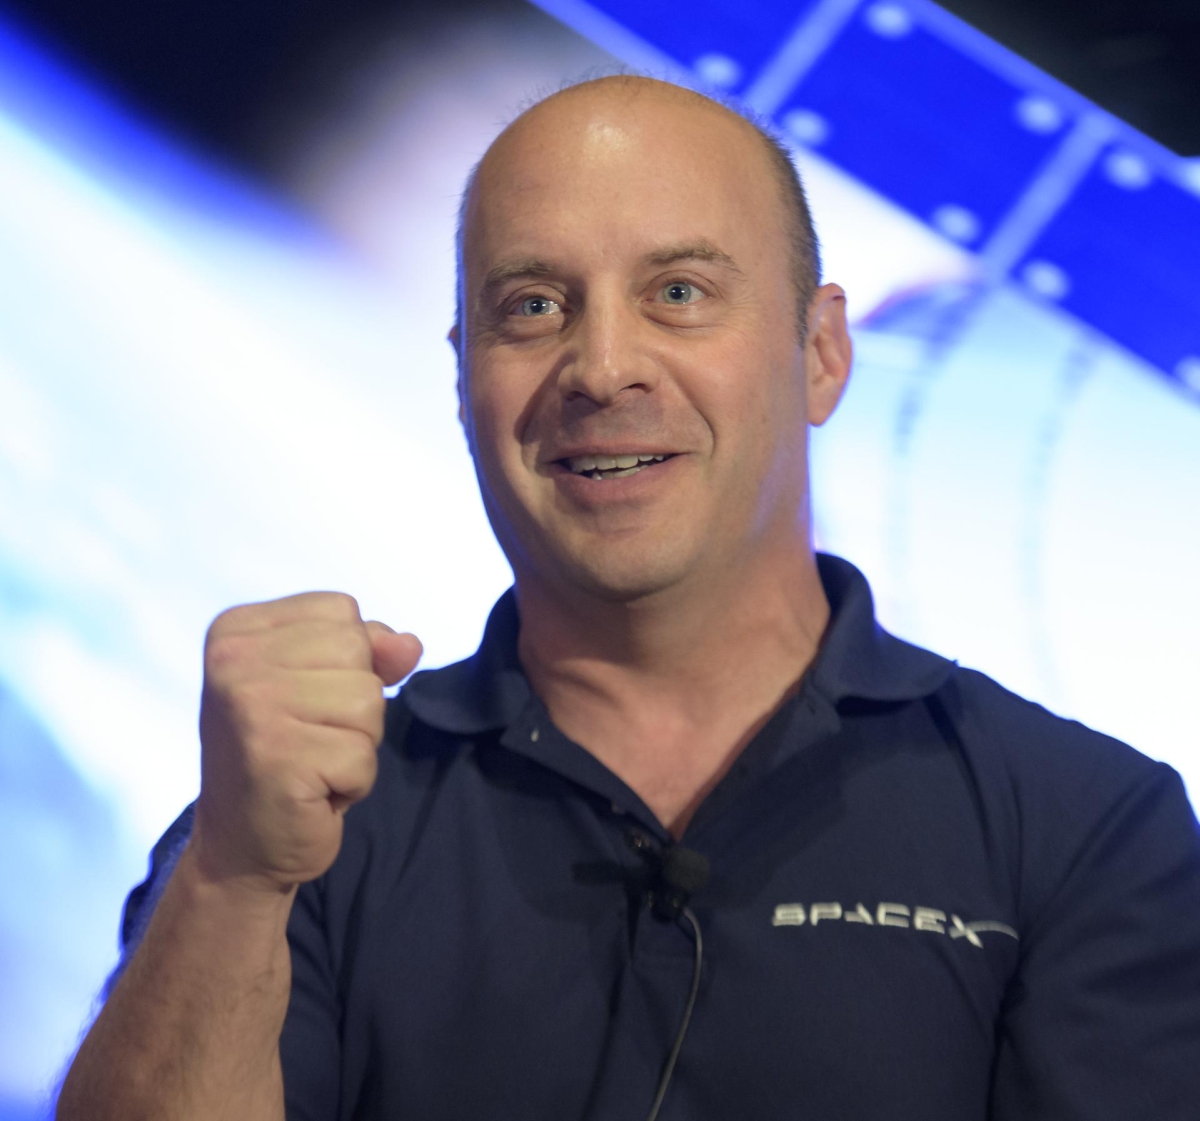 Reisman joined SpaceX in 2011.